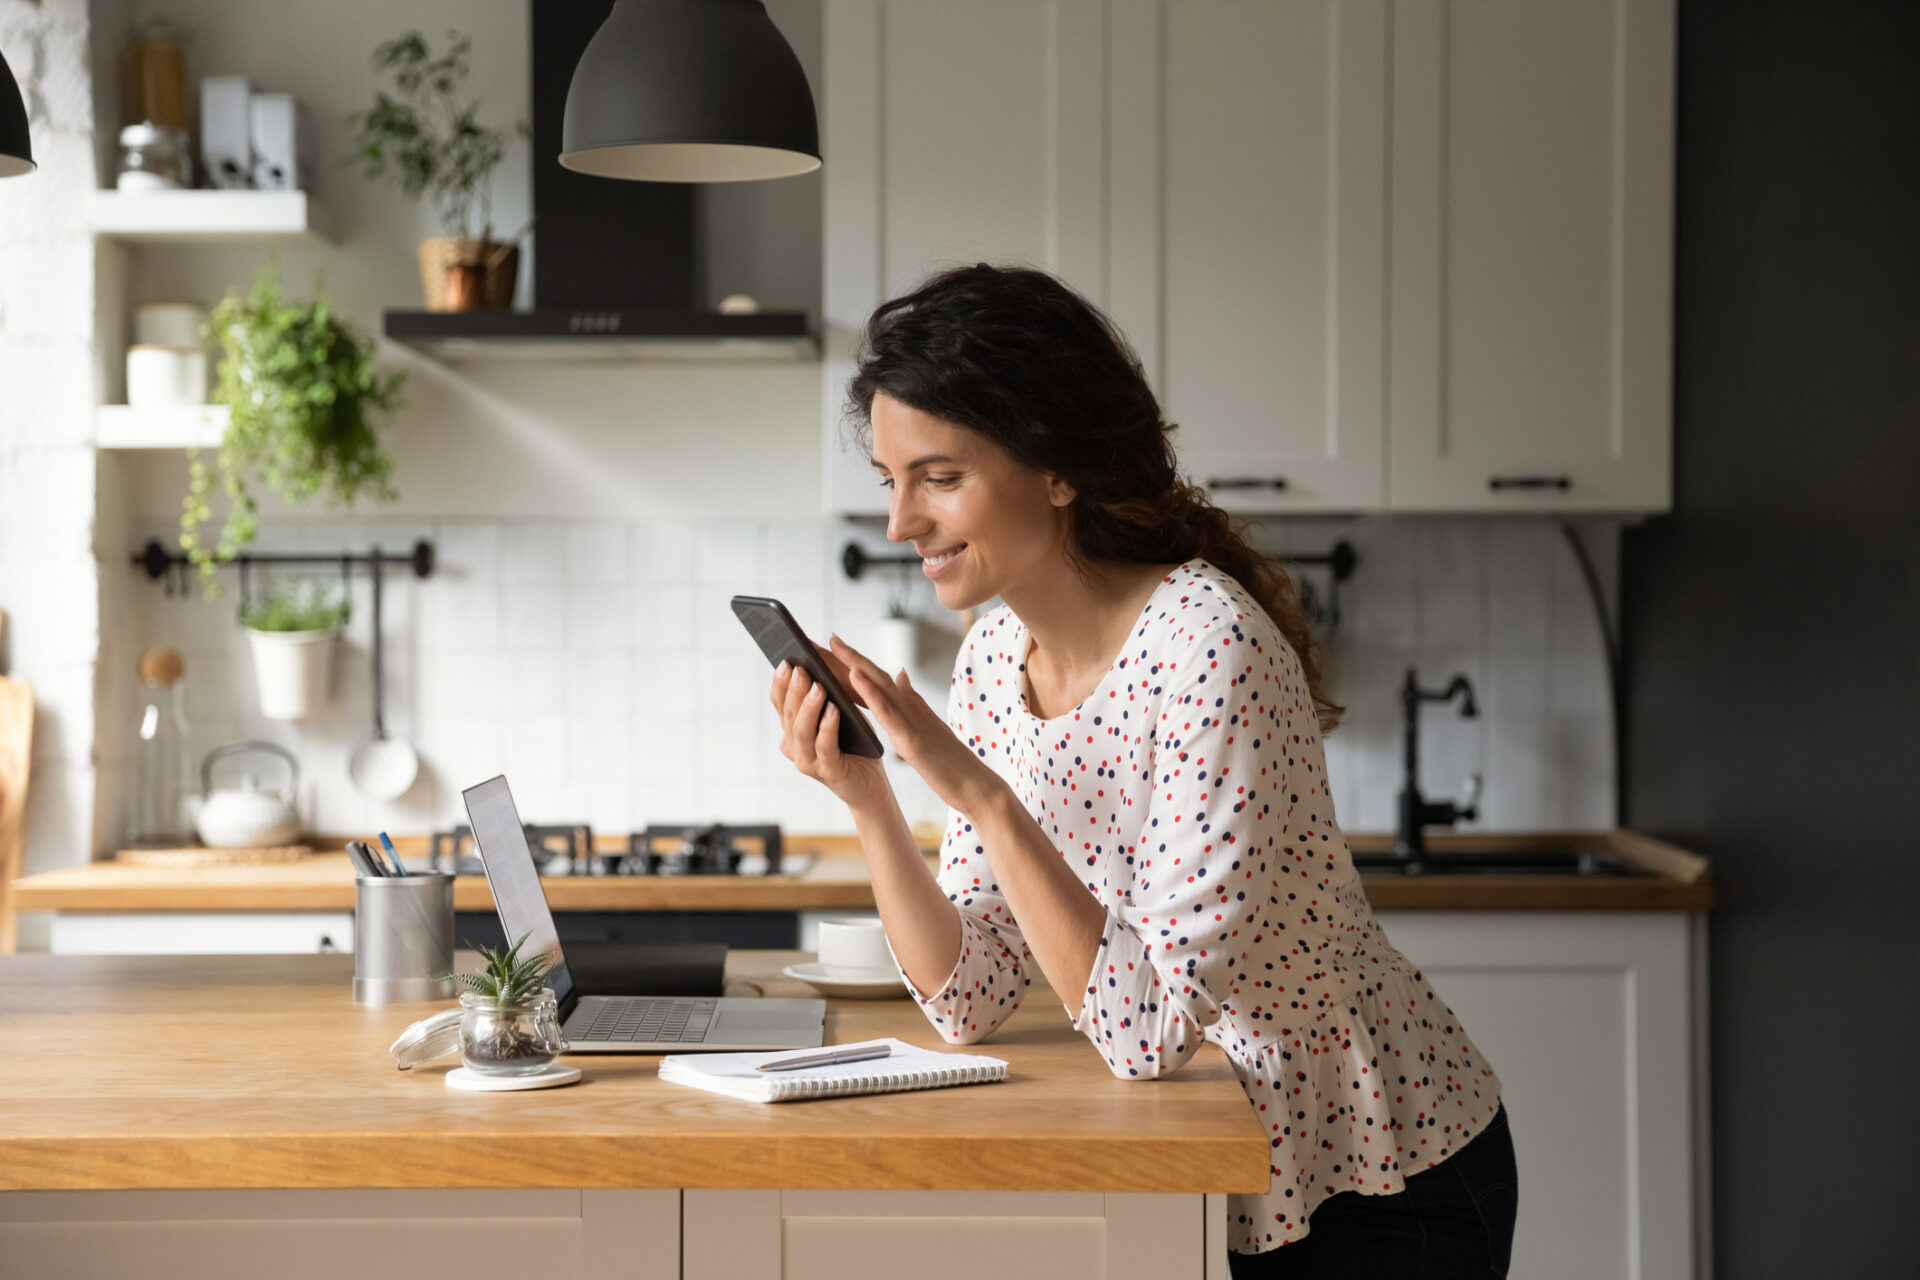 adult women looking at phone in kitchen